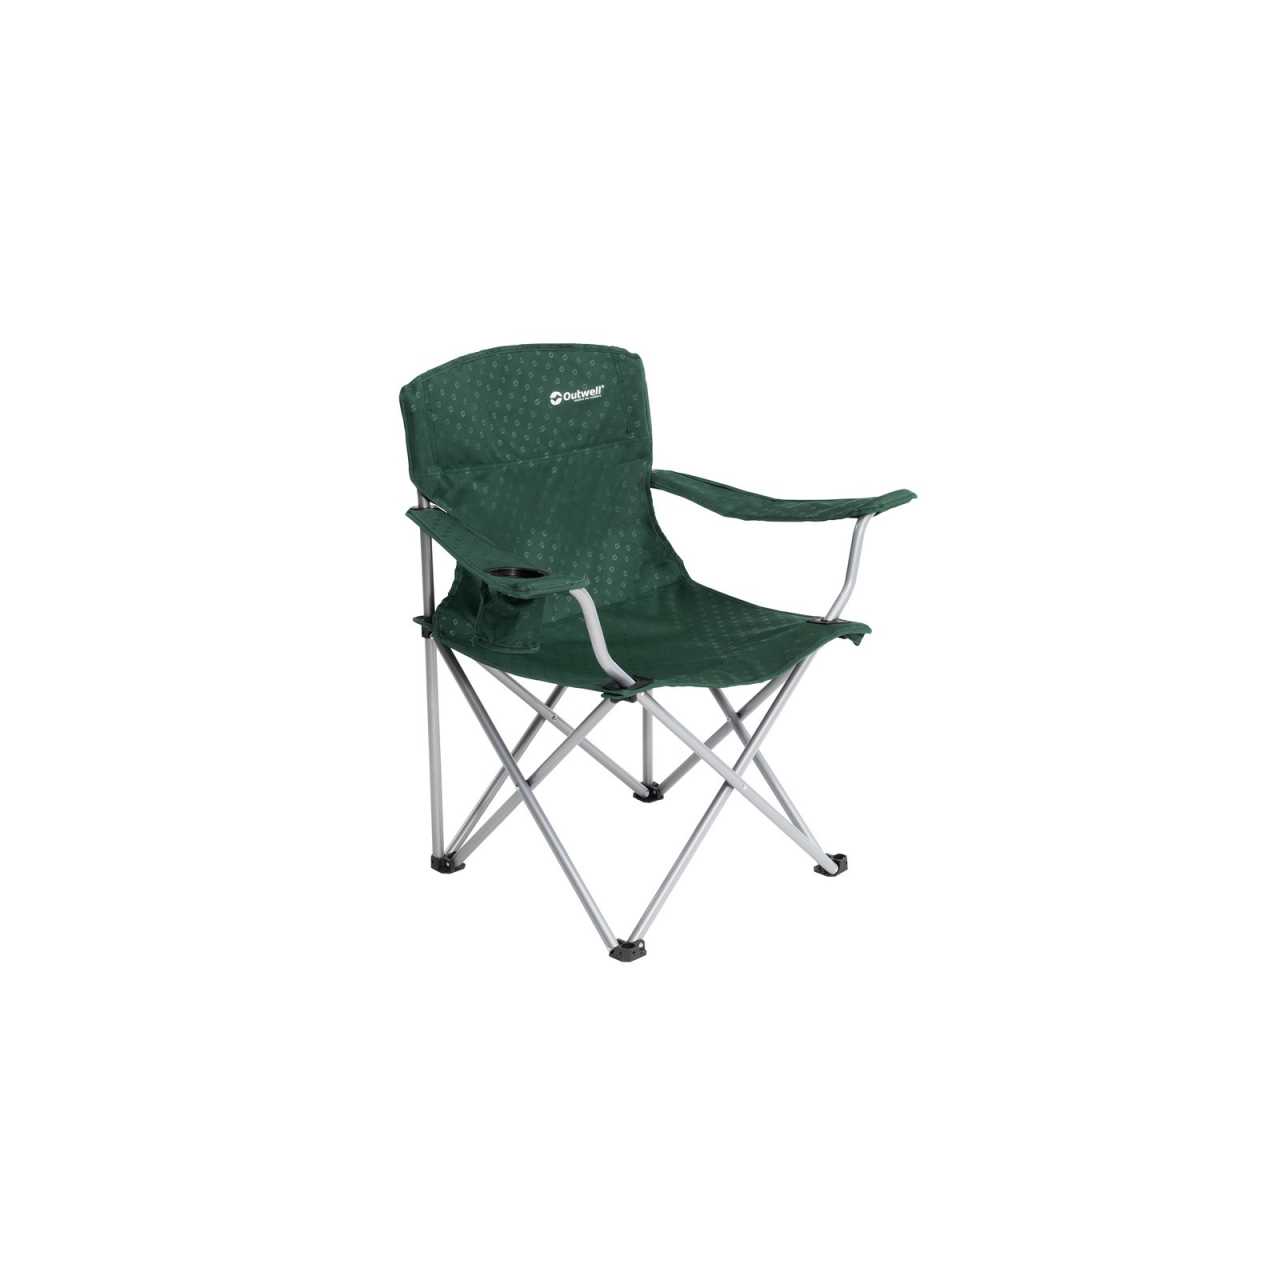 Outwell Campingstuhl Folding Furniture Catamarca Forest Green 470392